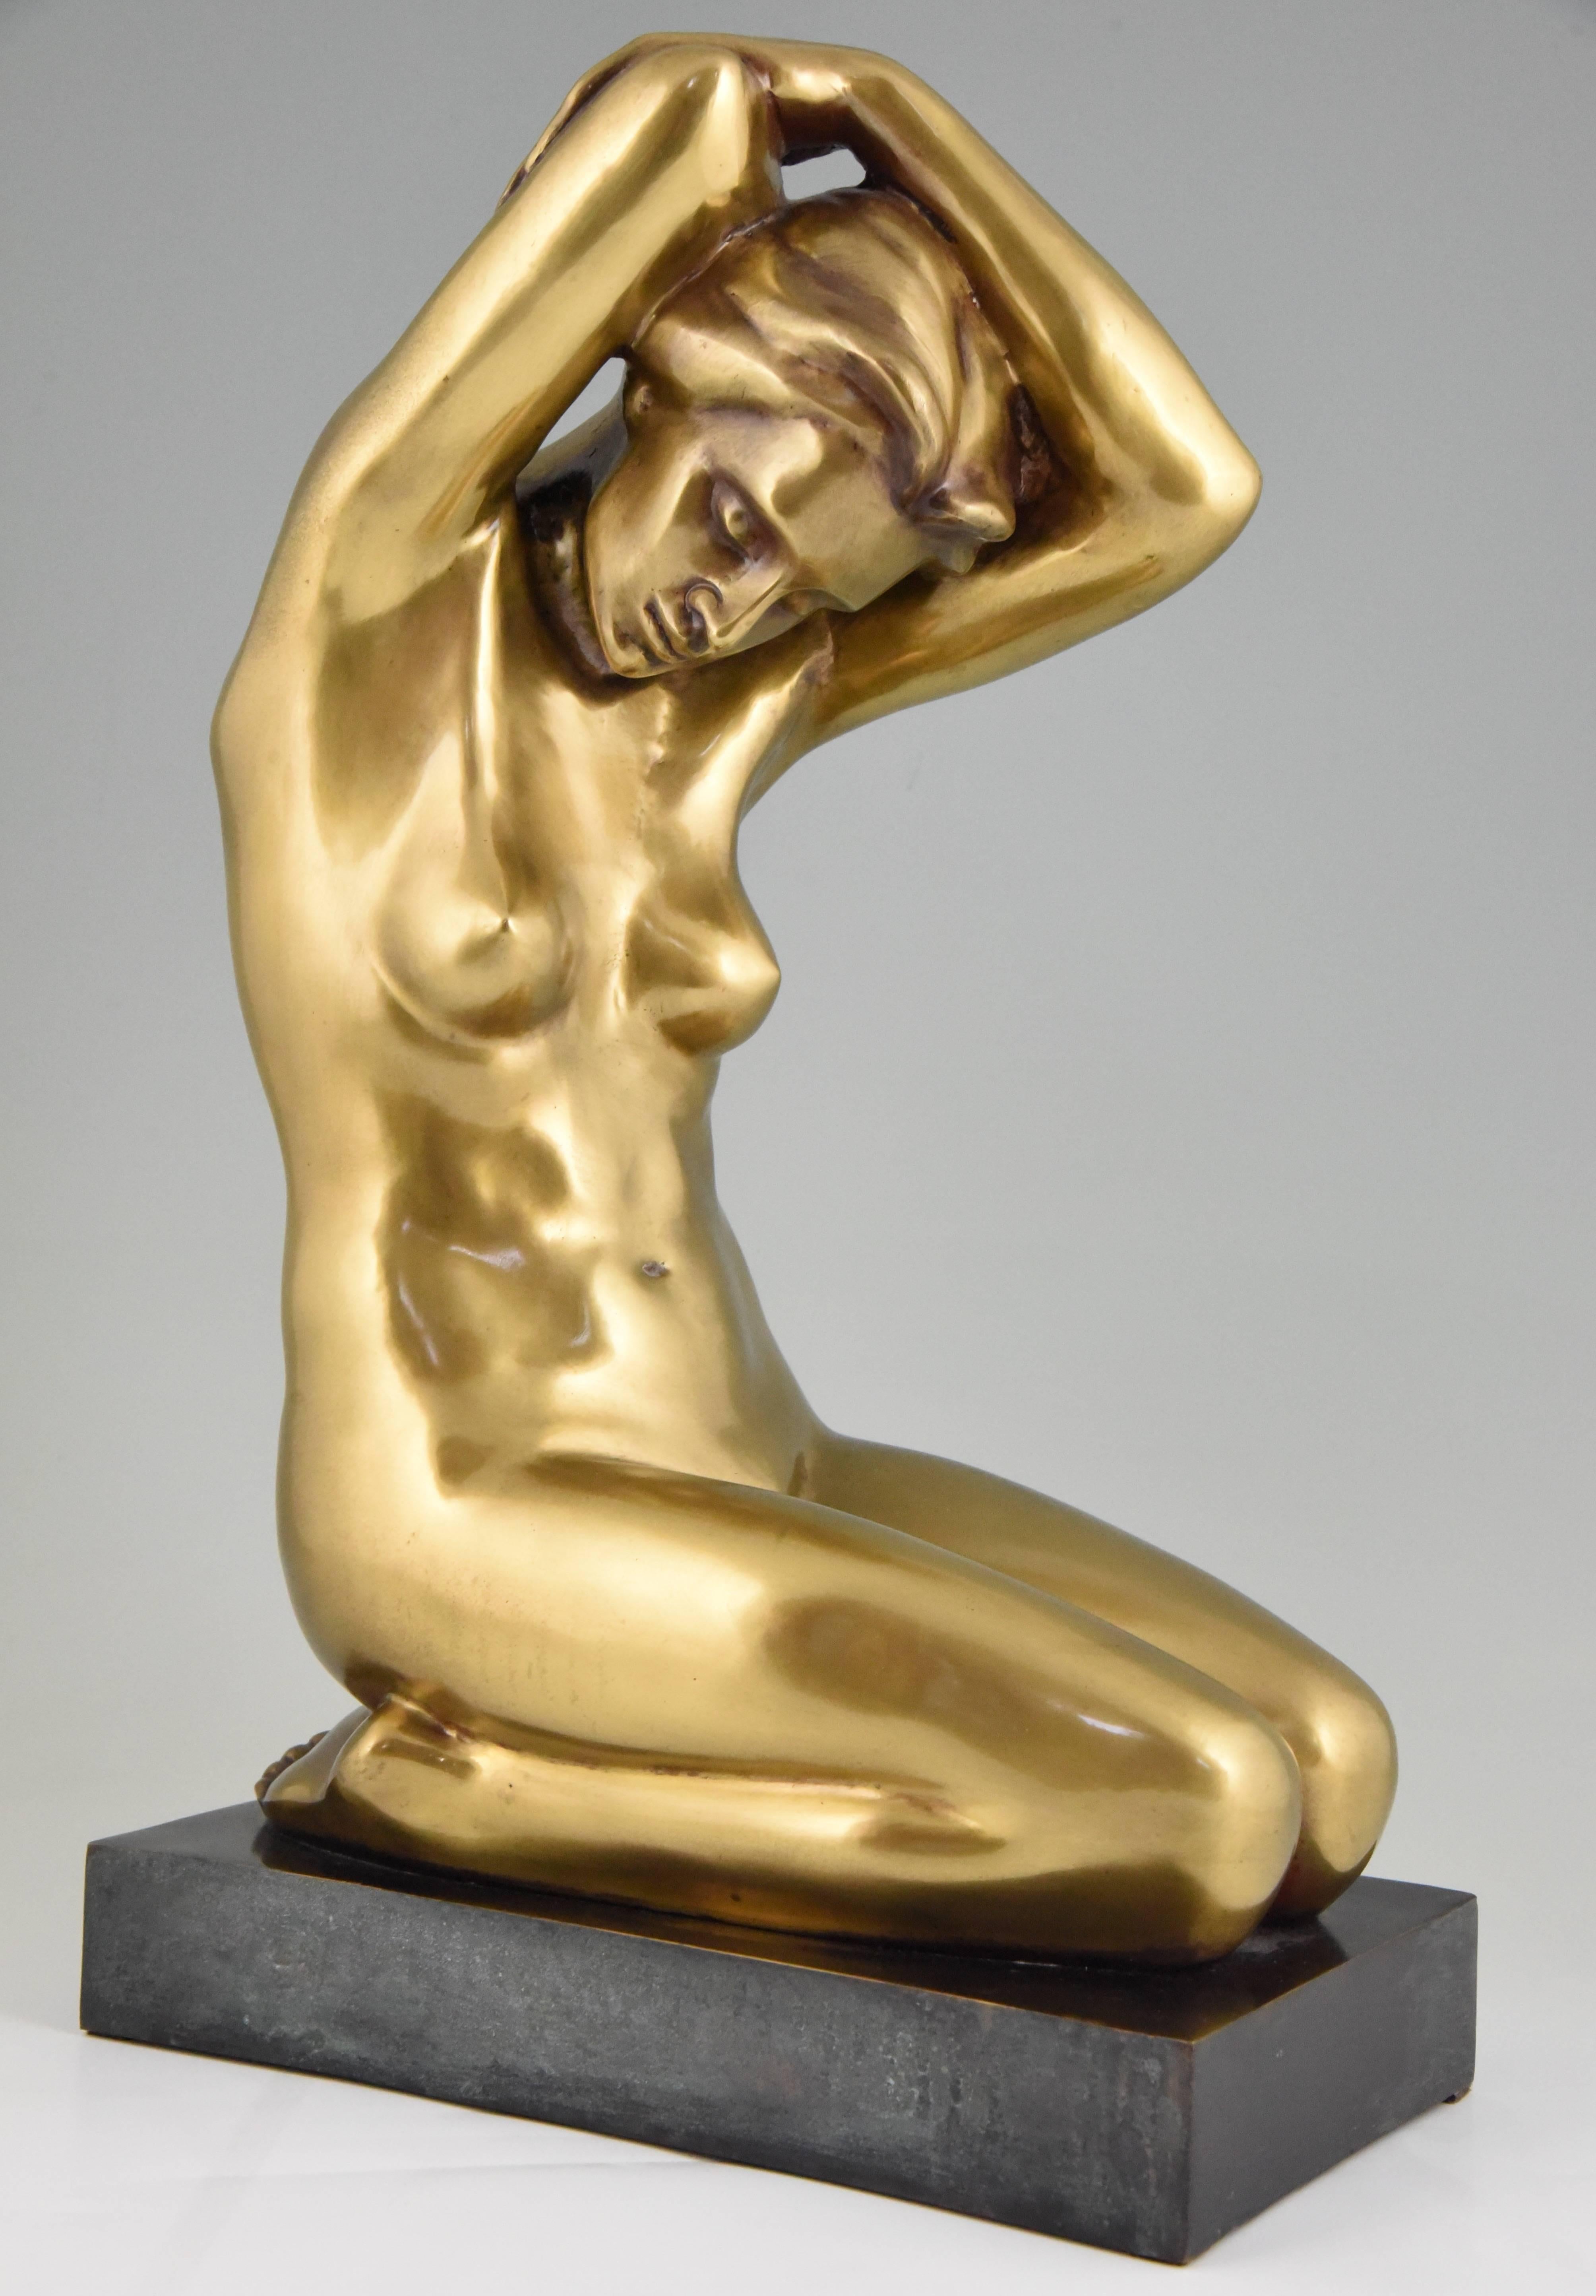 Elegant Art Deco bronze sculpture of a naked woman sitting on her knees with her arms over her head. This unsigned figurine is in the style of Arno Breker, a German artist who specialized in nudes.
Style: Art Deco
Date: 1930
Material: Patinated